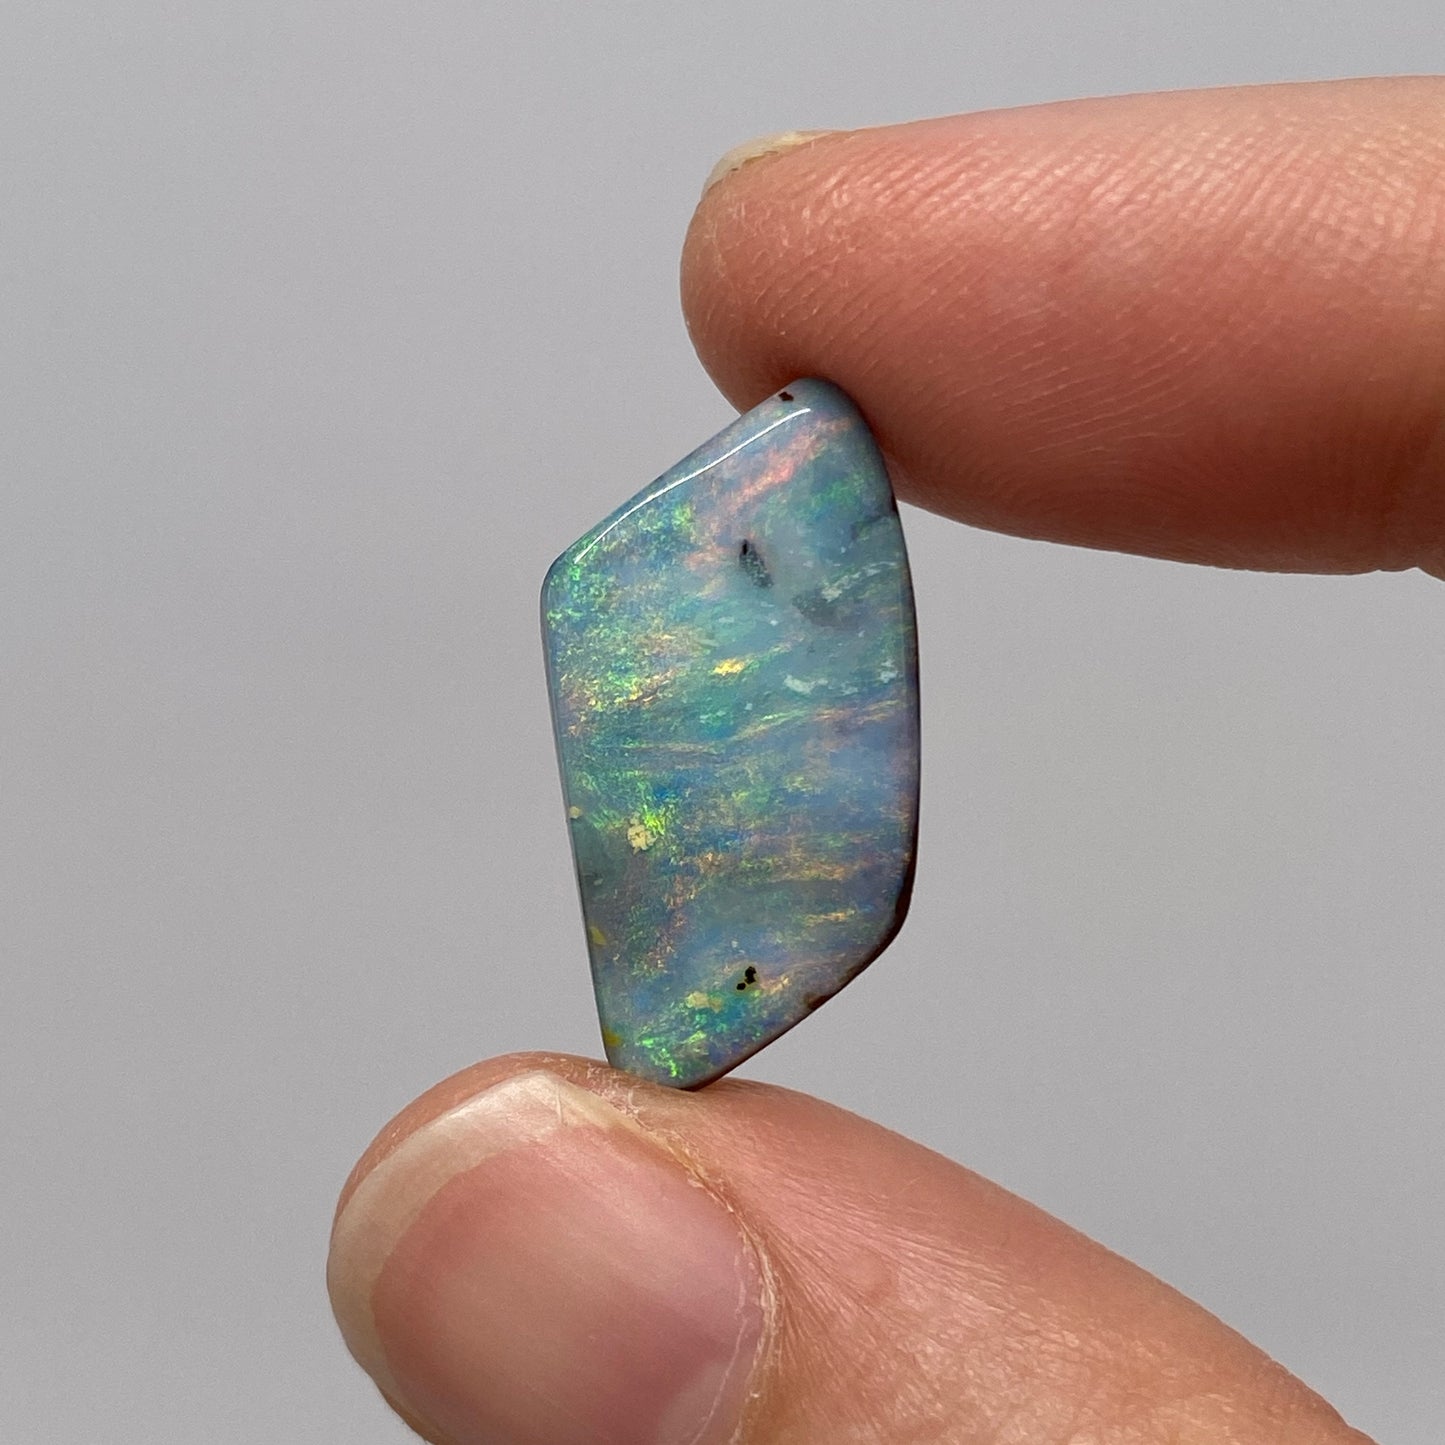 10.32 Ct pink and green boulder opal